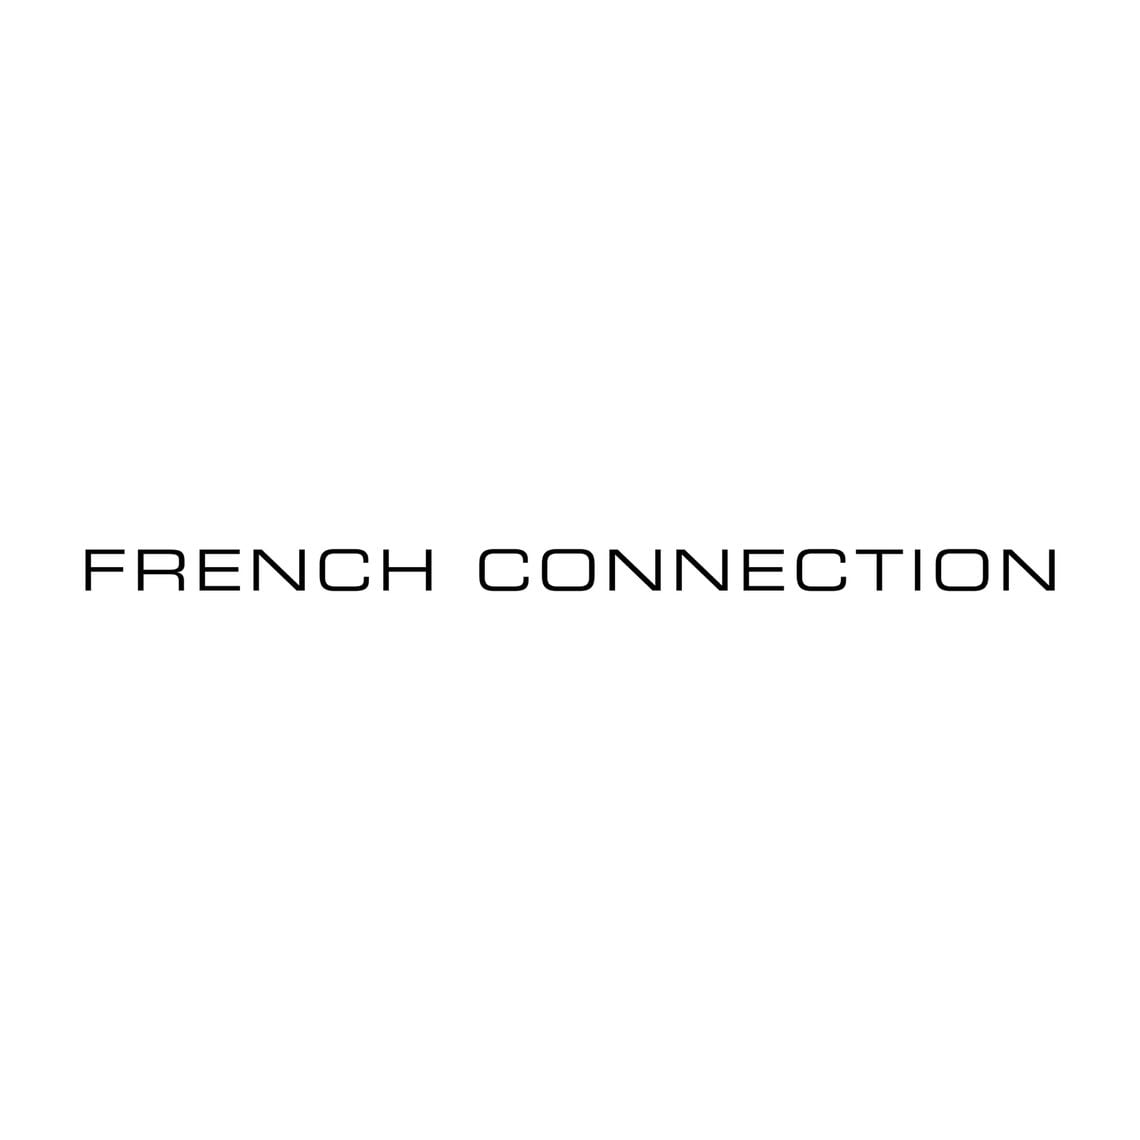 french connection logo